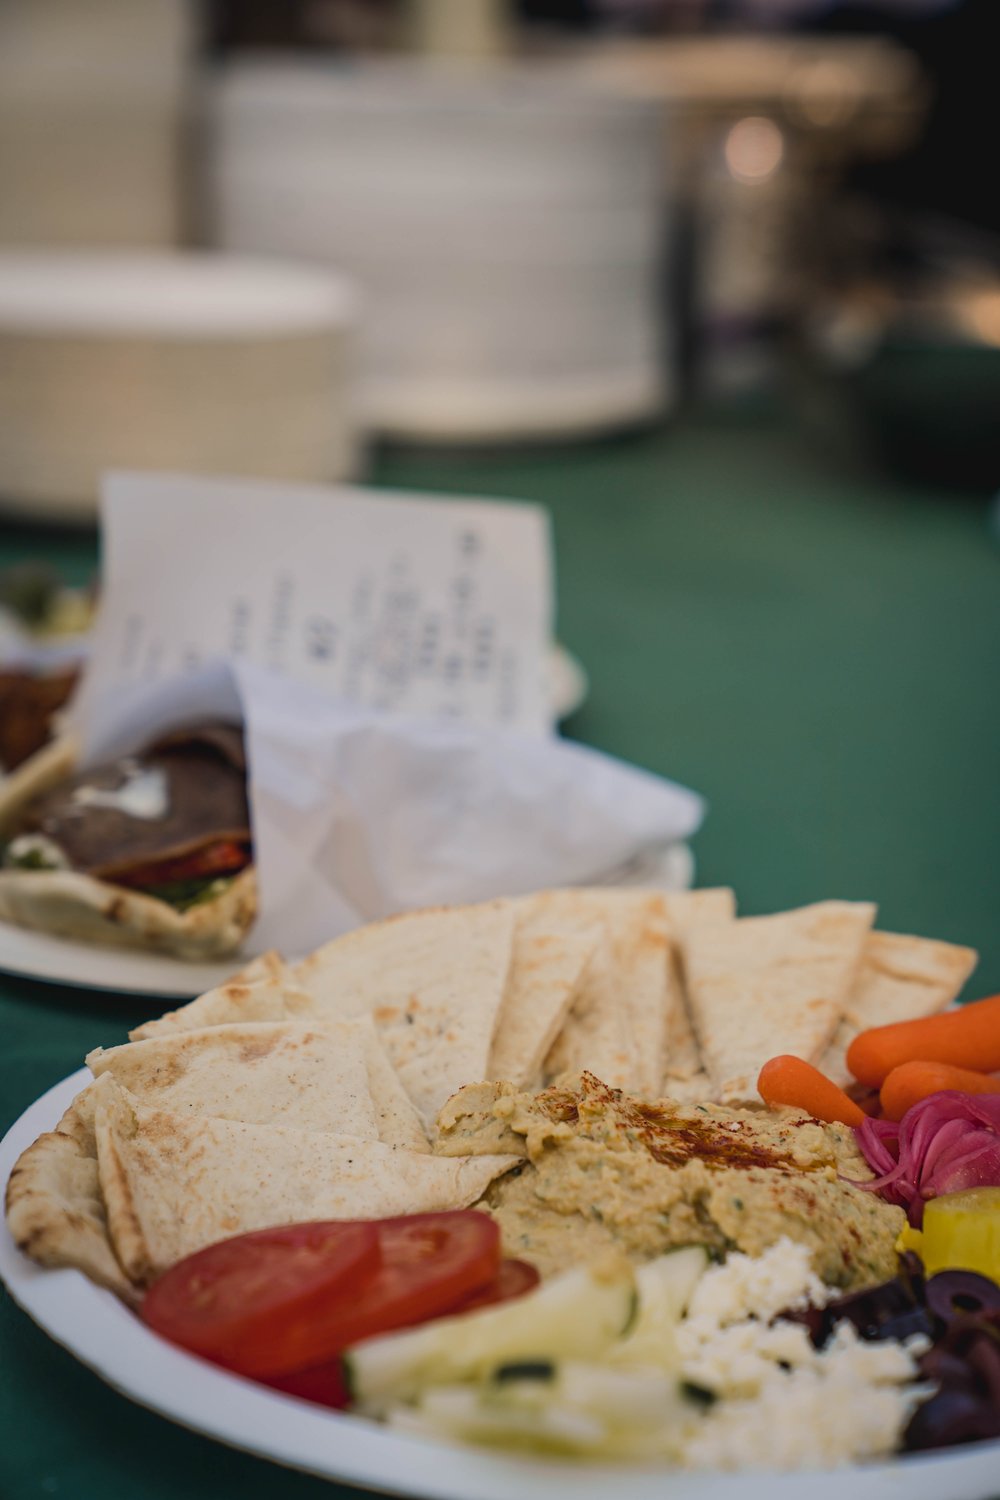 A hummus plate from OPA! Greek Food | Photos courtesy of the Festival at Sandpoint, photographer Rachael Baker